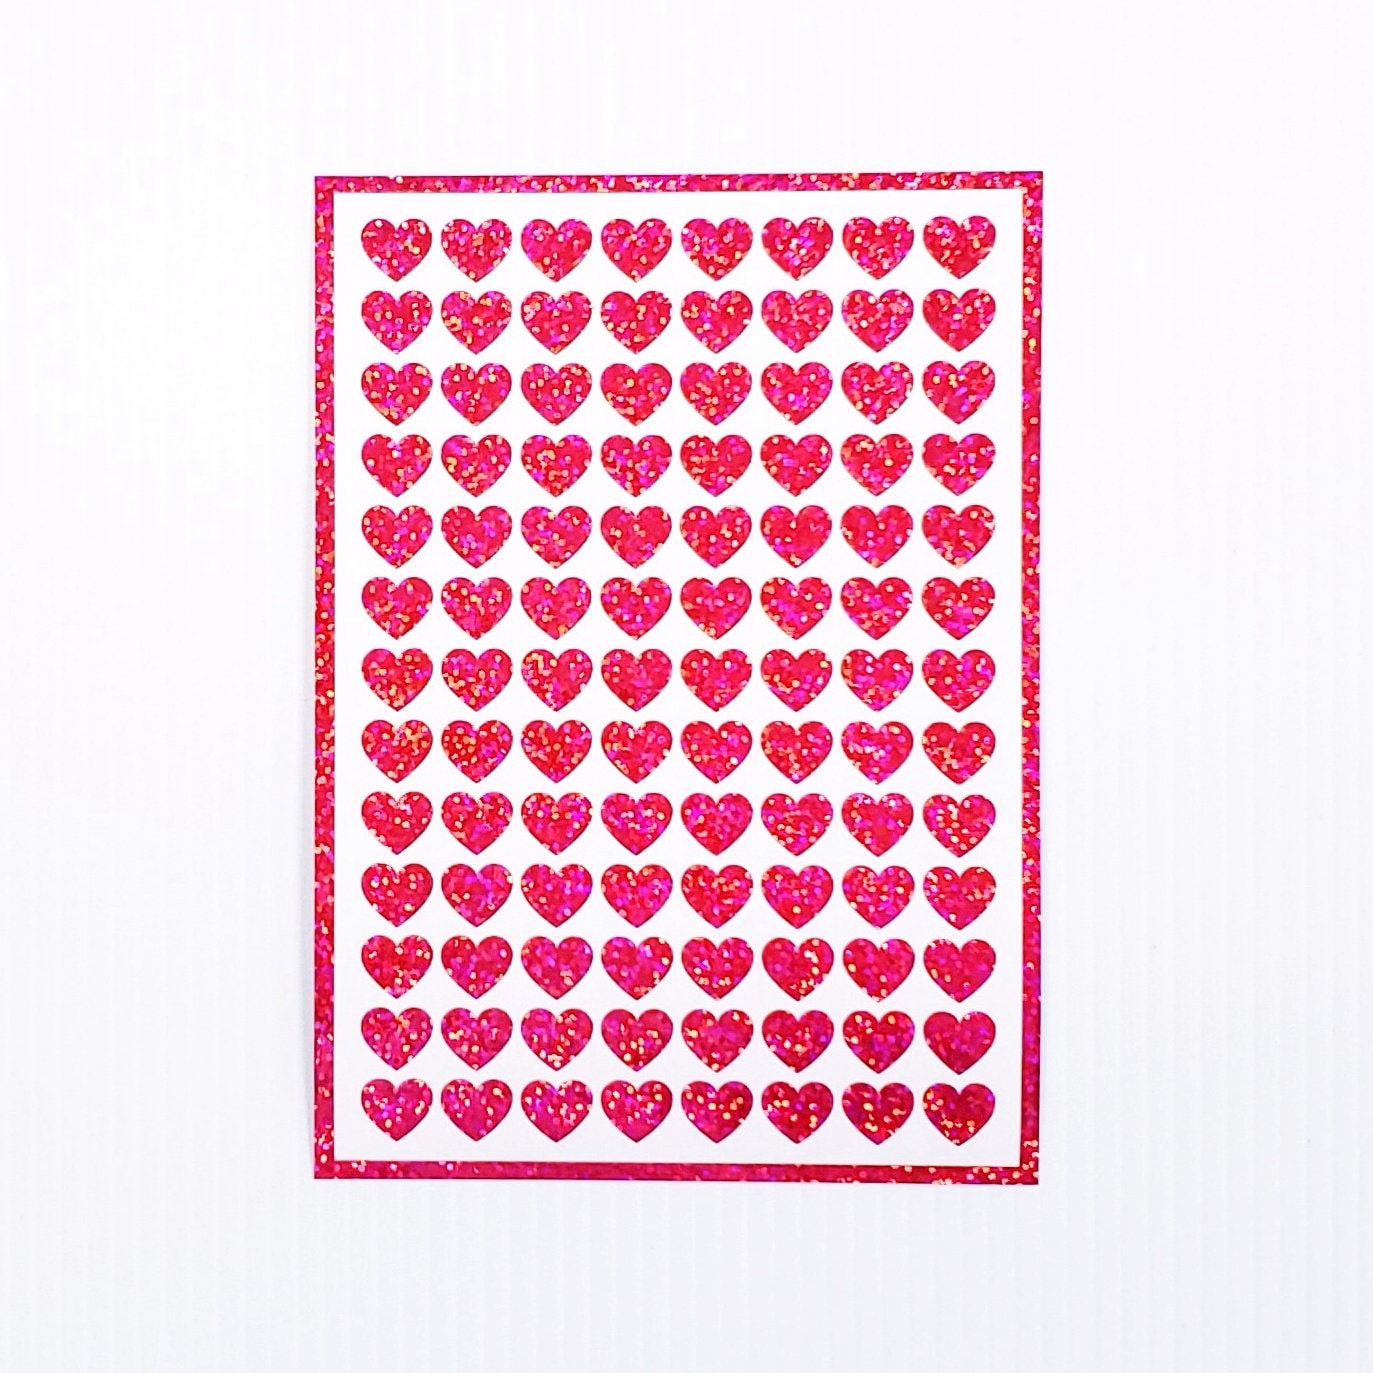 Pink Hearts Sticker Sheet. Set of 104 sparkly vinyl heart decals for planners, notebooks, journals, charts and crafts. Half inch hearts.